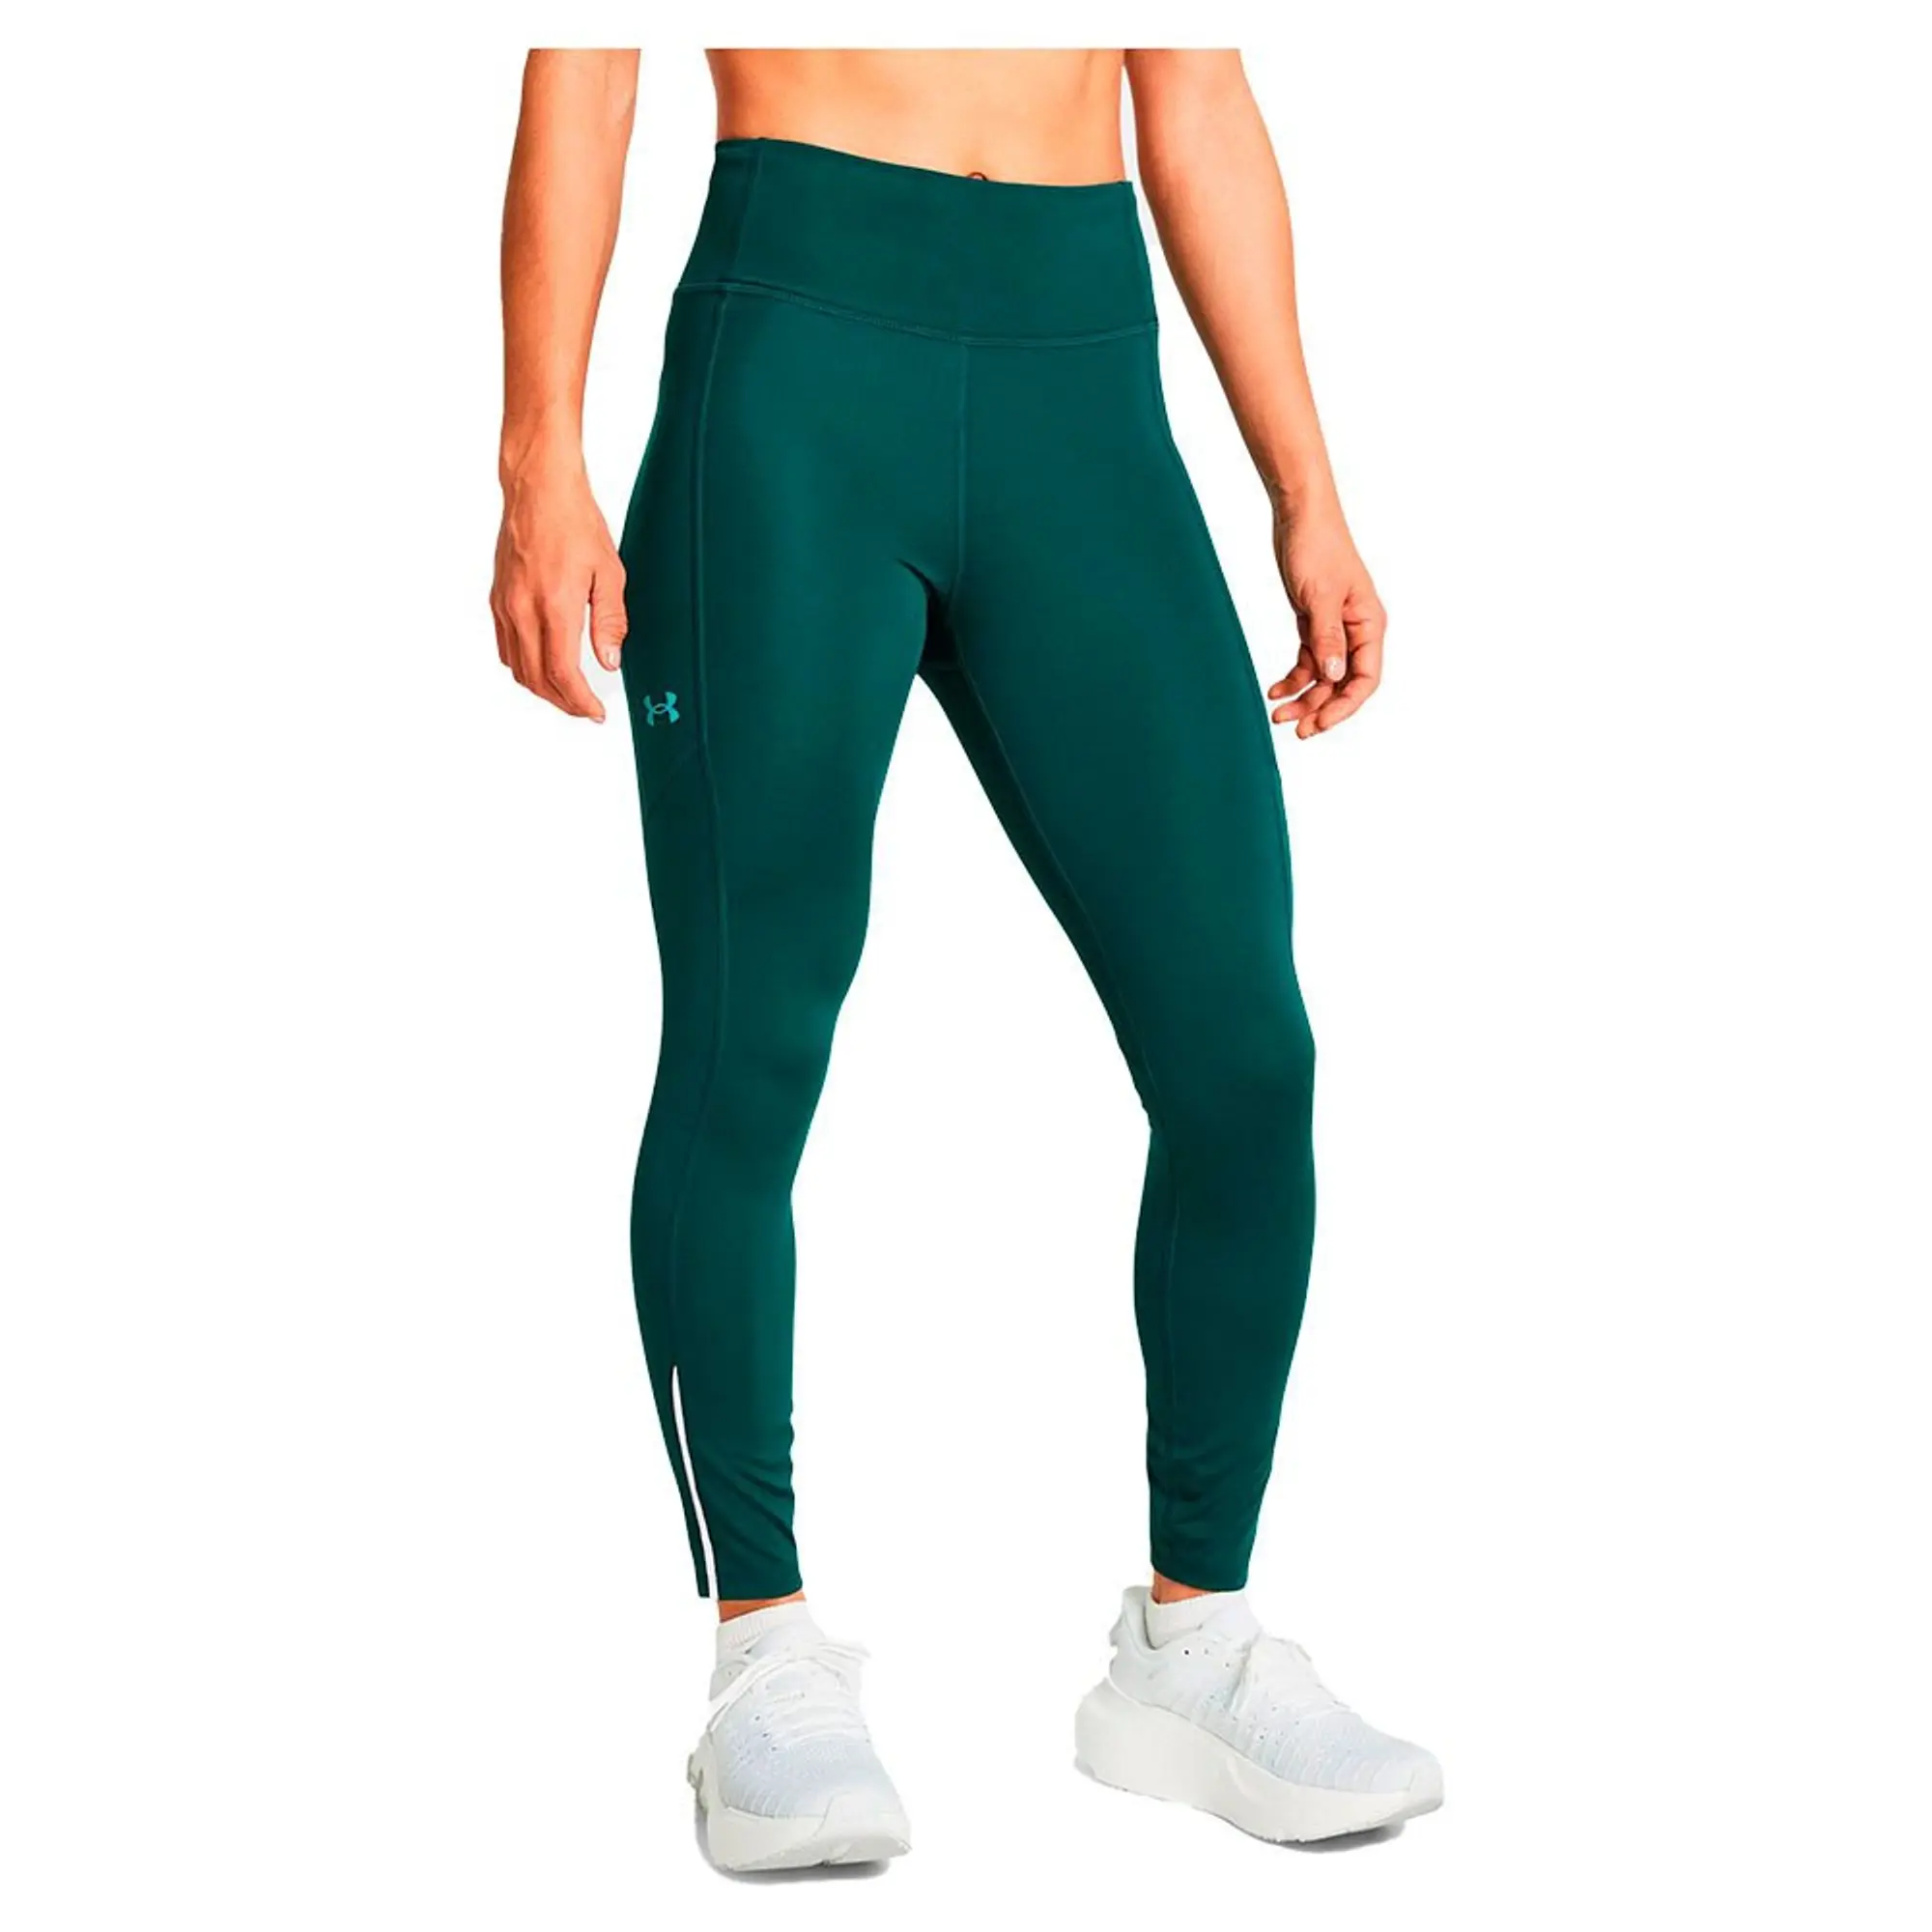 Mint Green Color Legging Ankle Length – LGM Fashions